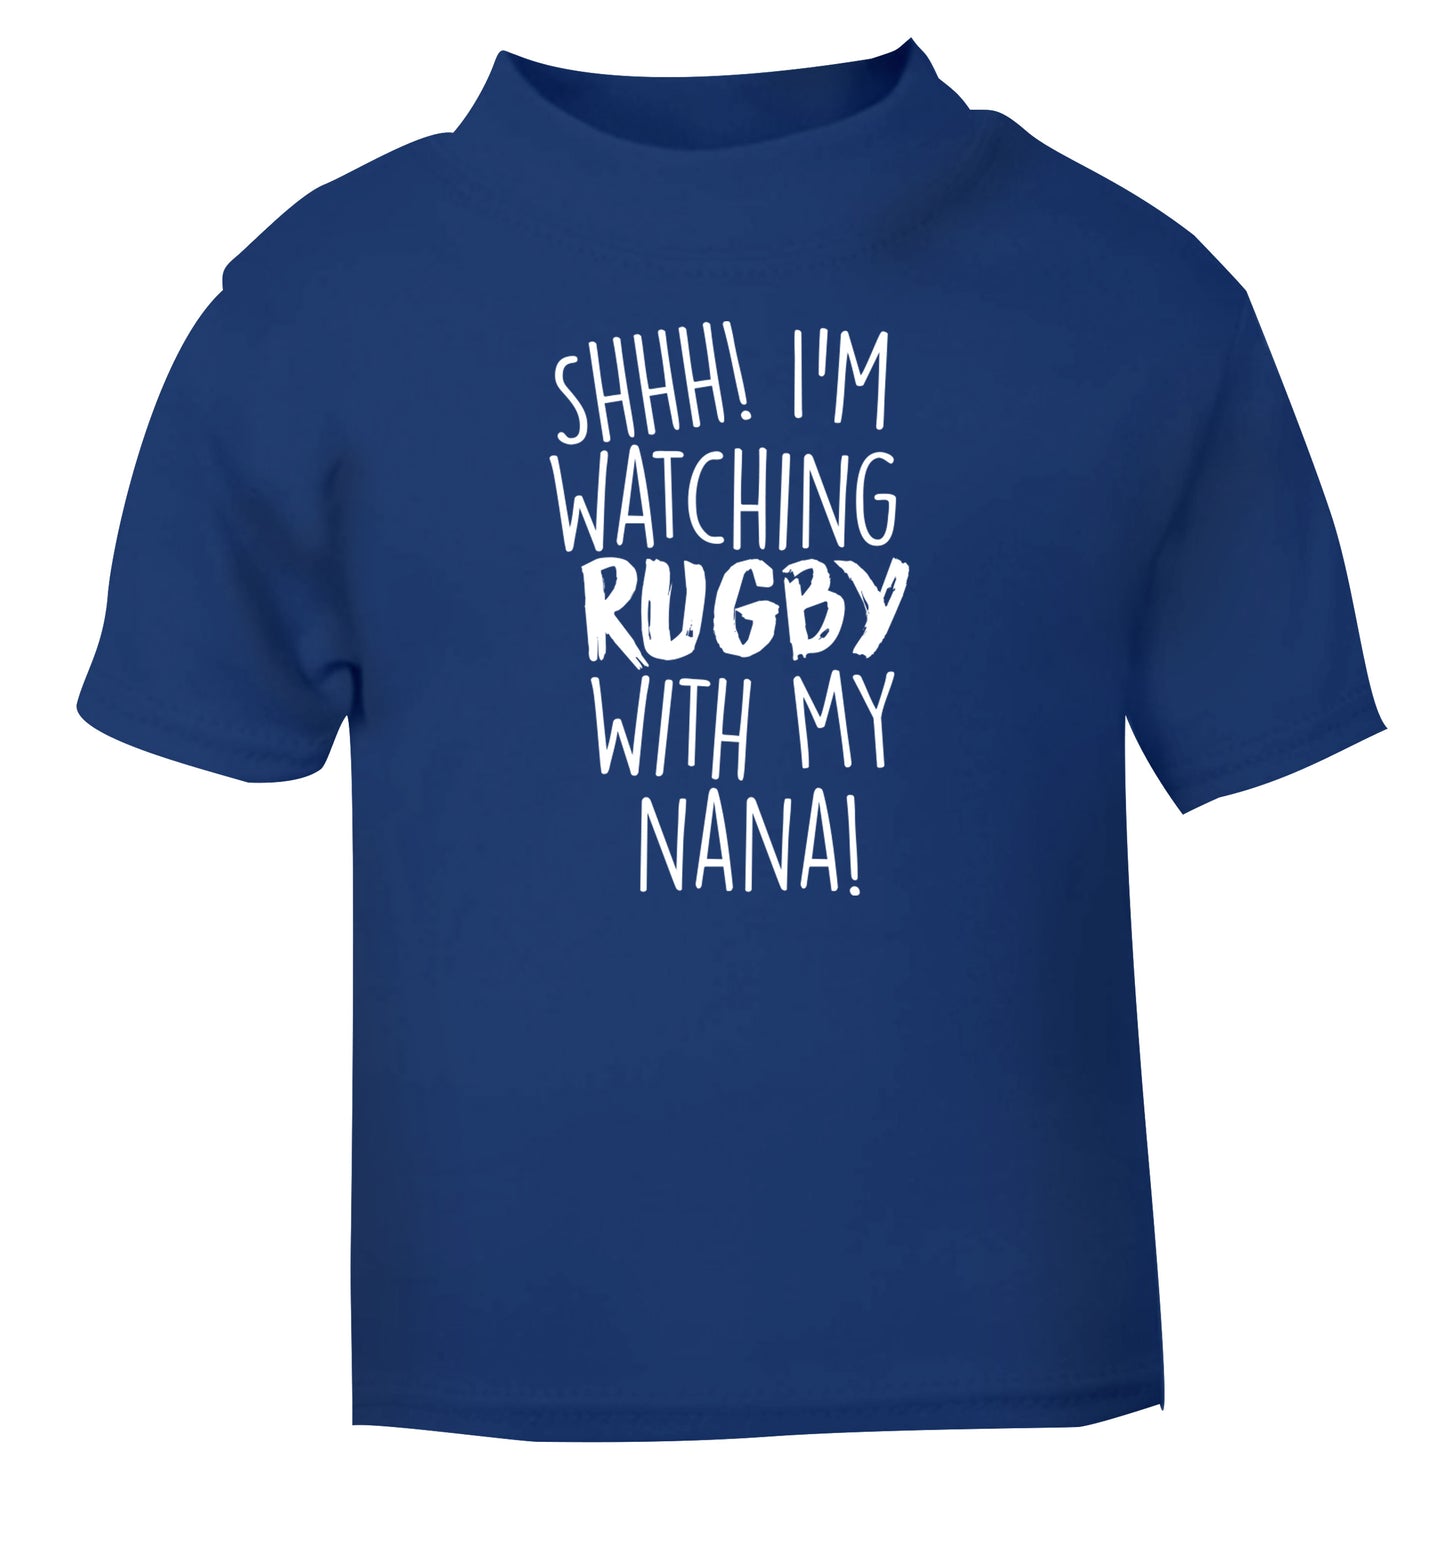 Shh I'm watching rugby with my nana blue Baby Toddler Tshirt 2 Years